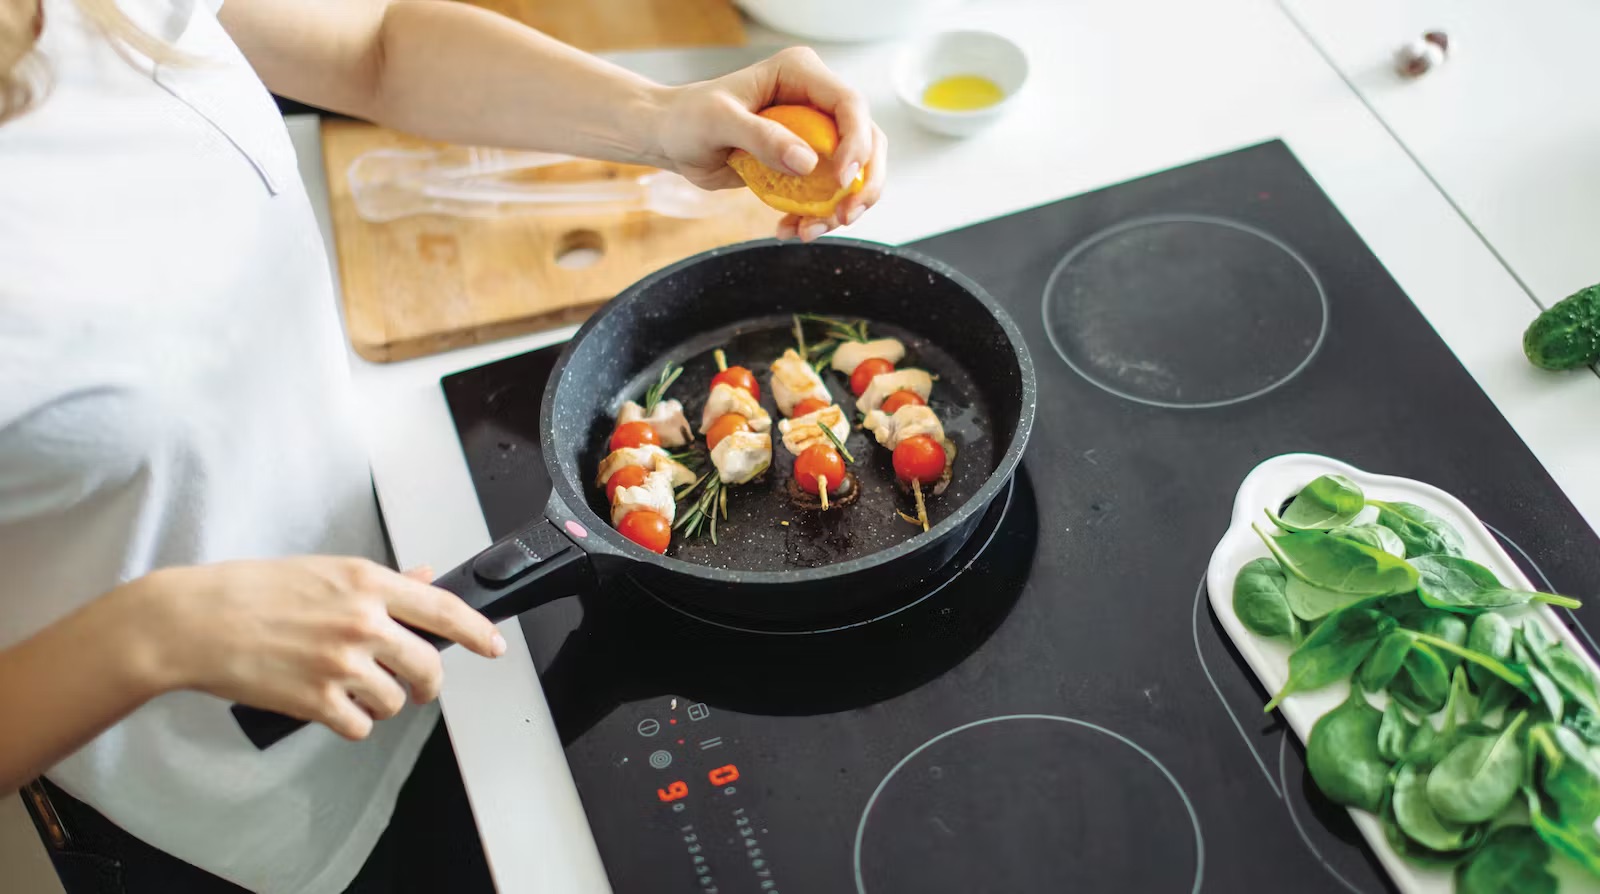  WaxonWare Grill Pan For StoveTop, Nonstick Griddle Pan